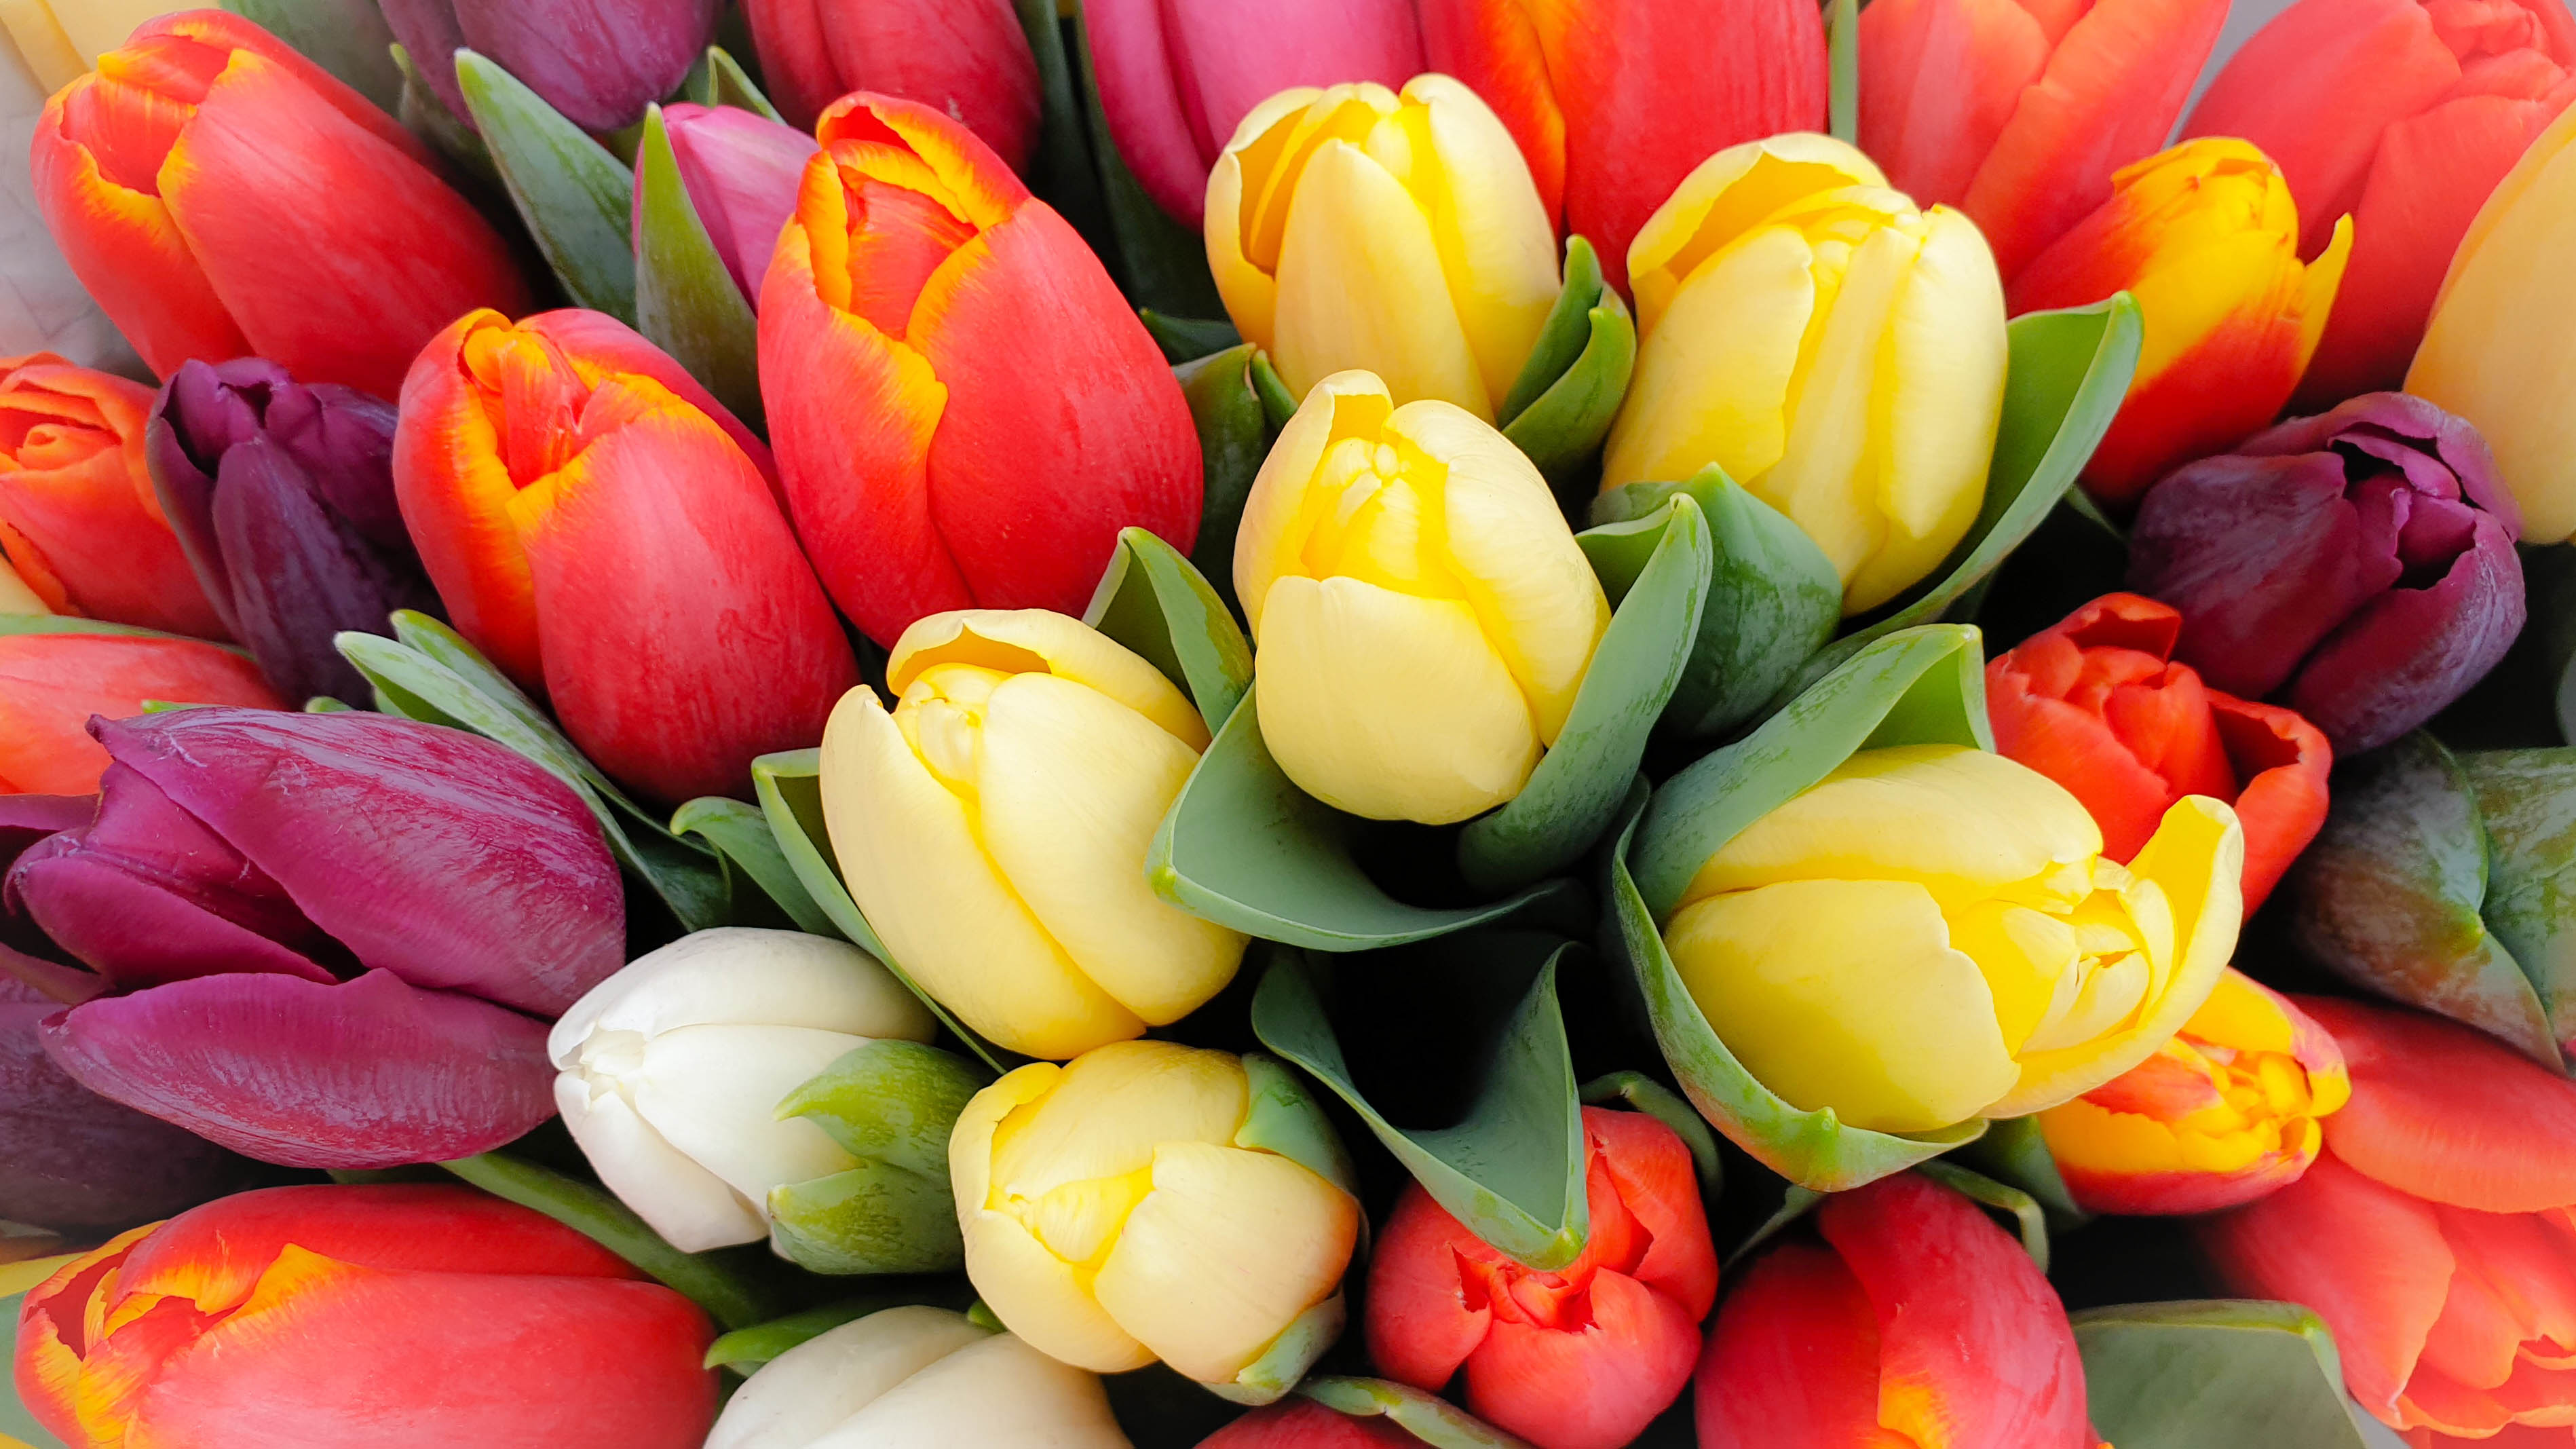 A bunch of tulips of different colors including yellow, red and white